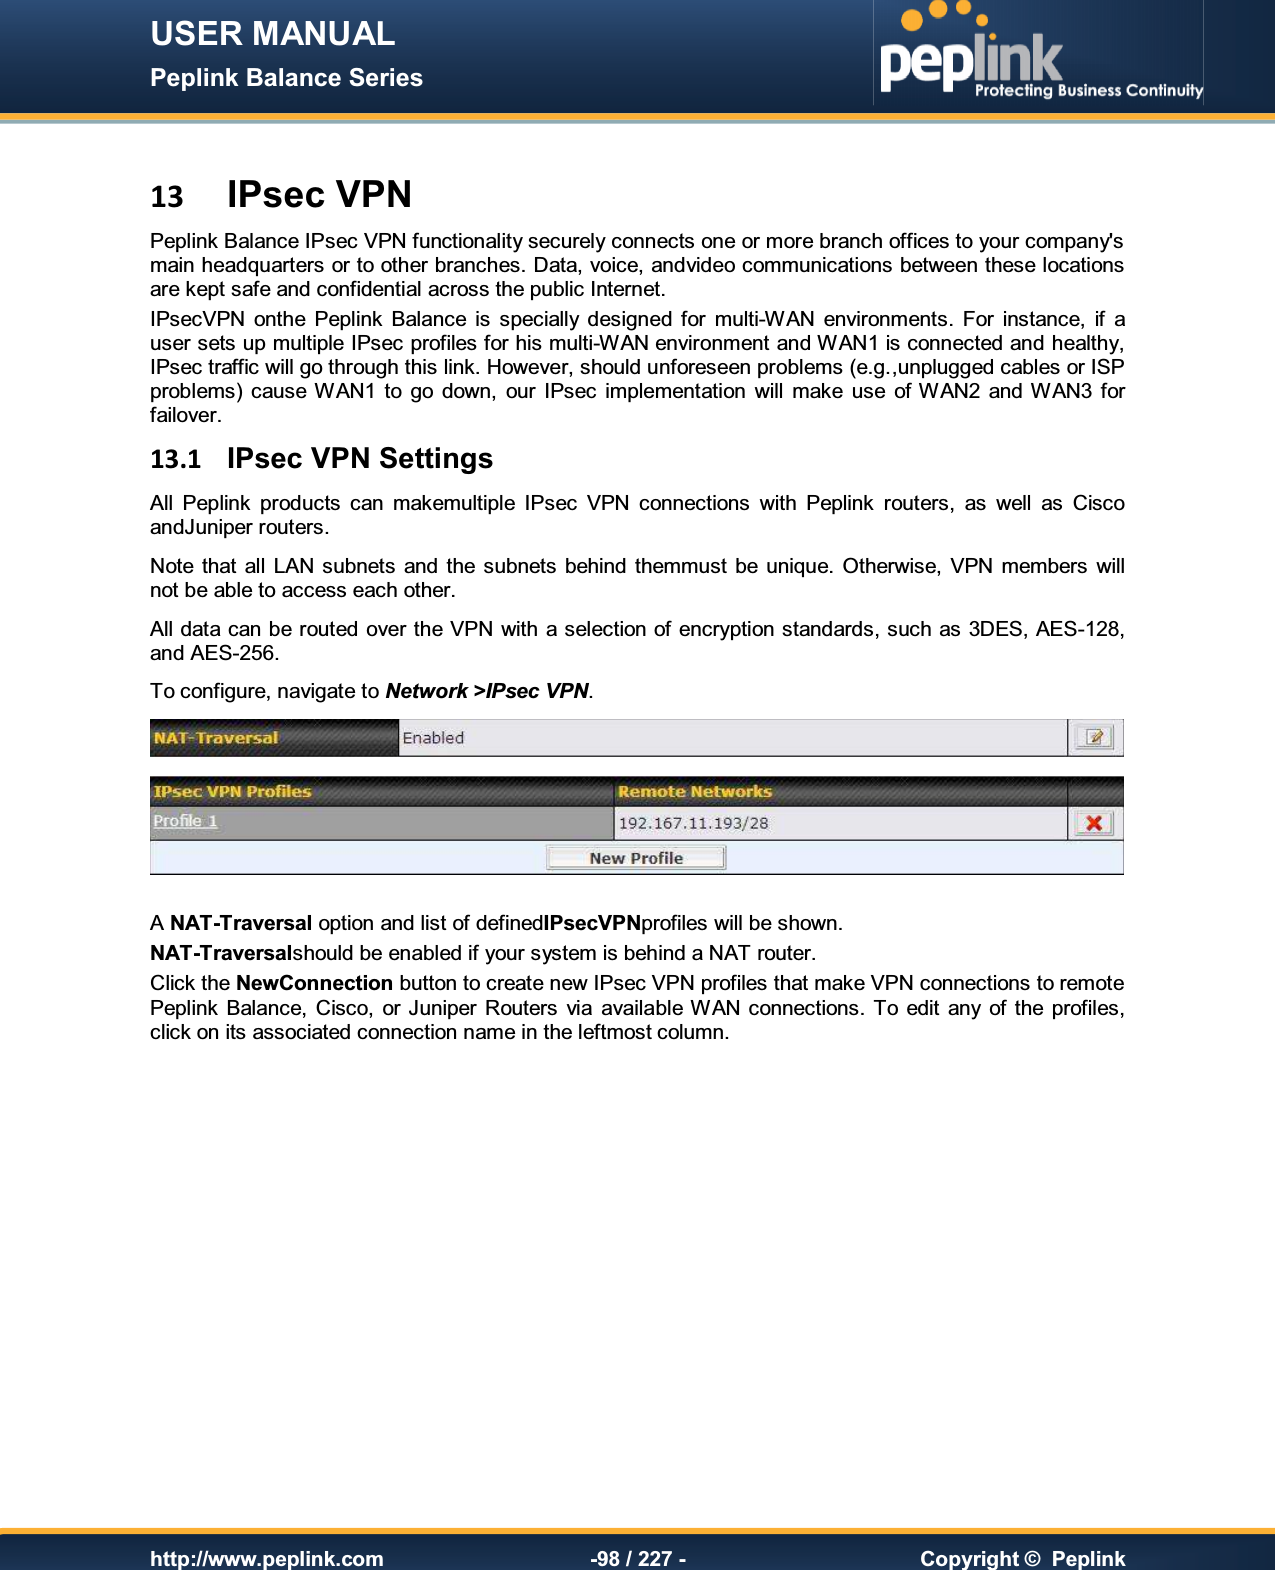 USER MANUAL Peplink Balance Series   http://www.peplink.com -98 / 227 -  Copyright ©  Peplink  13 IPsec VPN Peplink Balance IPsec VPN functionality securely connects one or more branch offices to your company&apos;s main headquarters or to other branches. Data, voice, andvideo communications between these locations are kept safe and confidential across the public Internet. IPsecVPN  onthe  Peplink  Balance  is  specially  designed for  multi-WAN  environments.  For  instance,  if  a user sets up multiple IPsec profiles for his multi-WAN environment and WAN1 is connected and healthy, IPsec traffic will go through this link. However, should unforeseen problems (e.g.,unplugged cables or ISP problems) cause WAN1  to  go  down,  our  IPsec  implementation  will  make  use  of WAN2  and  WAN3  for failover. 13.1  IPsec VPN Settings All  Peplink  products  can  makemultiple  IPsec  VPN  connections  with  Peplink  routers,  as  well  as  Cisco andJuniper routers. Note  that  all  LAN subnets  and  the subnets  behind  themmust be  unique.  Otherwise,  VPN  members  will not be able to access each other. All data can be routed over the VPN with a selection of encryption standards, such as 3DES, AES-128, and AES-256. To configure, navigate to Network &gt;IPsec VPN.   A NAT-Traversal option and list of definedIPsecVPNprofiles will be shown.   NAT-Traversalshould be enabled if your system is behind a NAT router. Click the NewConnection button to create new IPsec VPN profiles that make VPN connections to remote Peplink  Balance,  Cisco, or Juniper  Routers  via  available WAN  connections. To edit  any  of  the  profiles, click on its associated connection name in the leftmost column.  